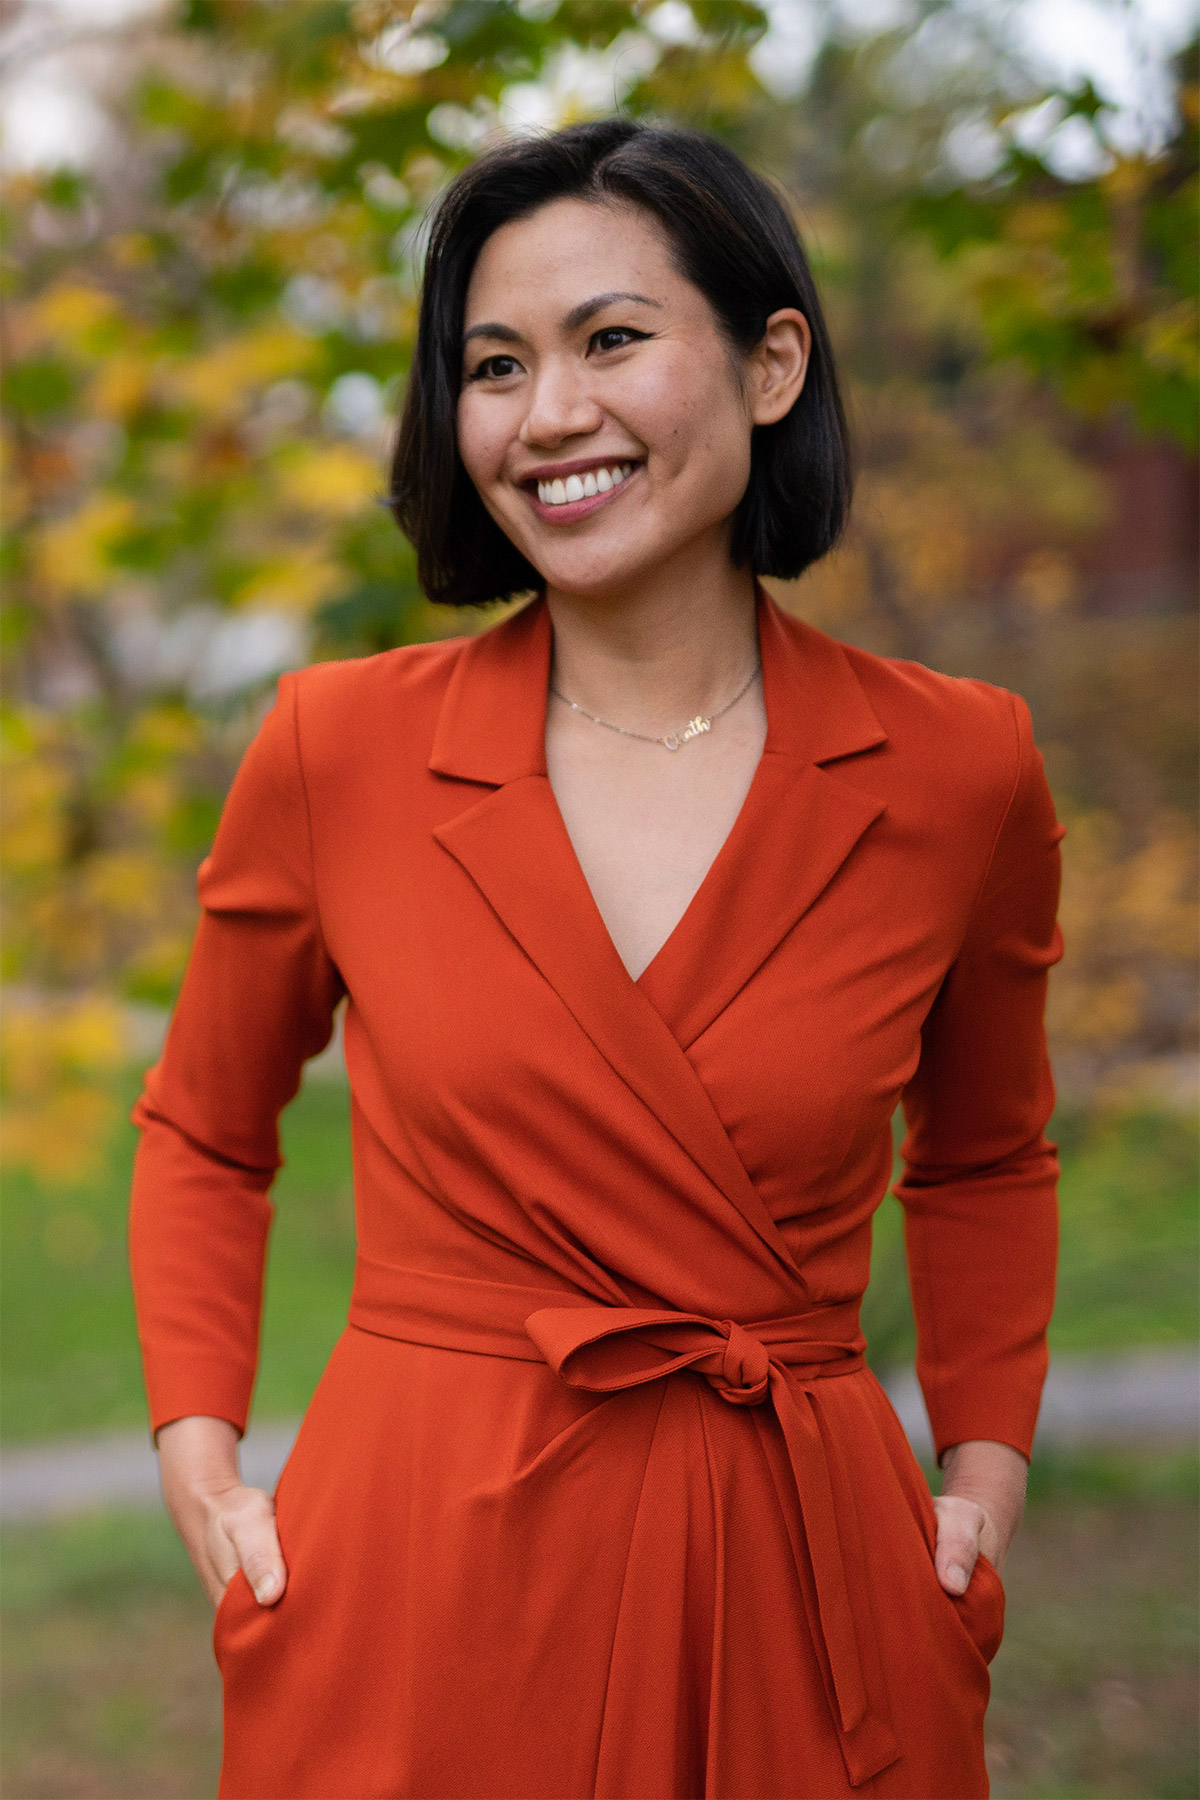 A person with long, black hair and a bright red-orange dress smiles at the camera